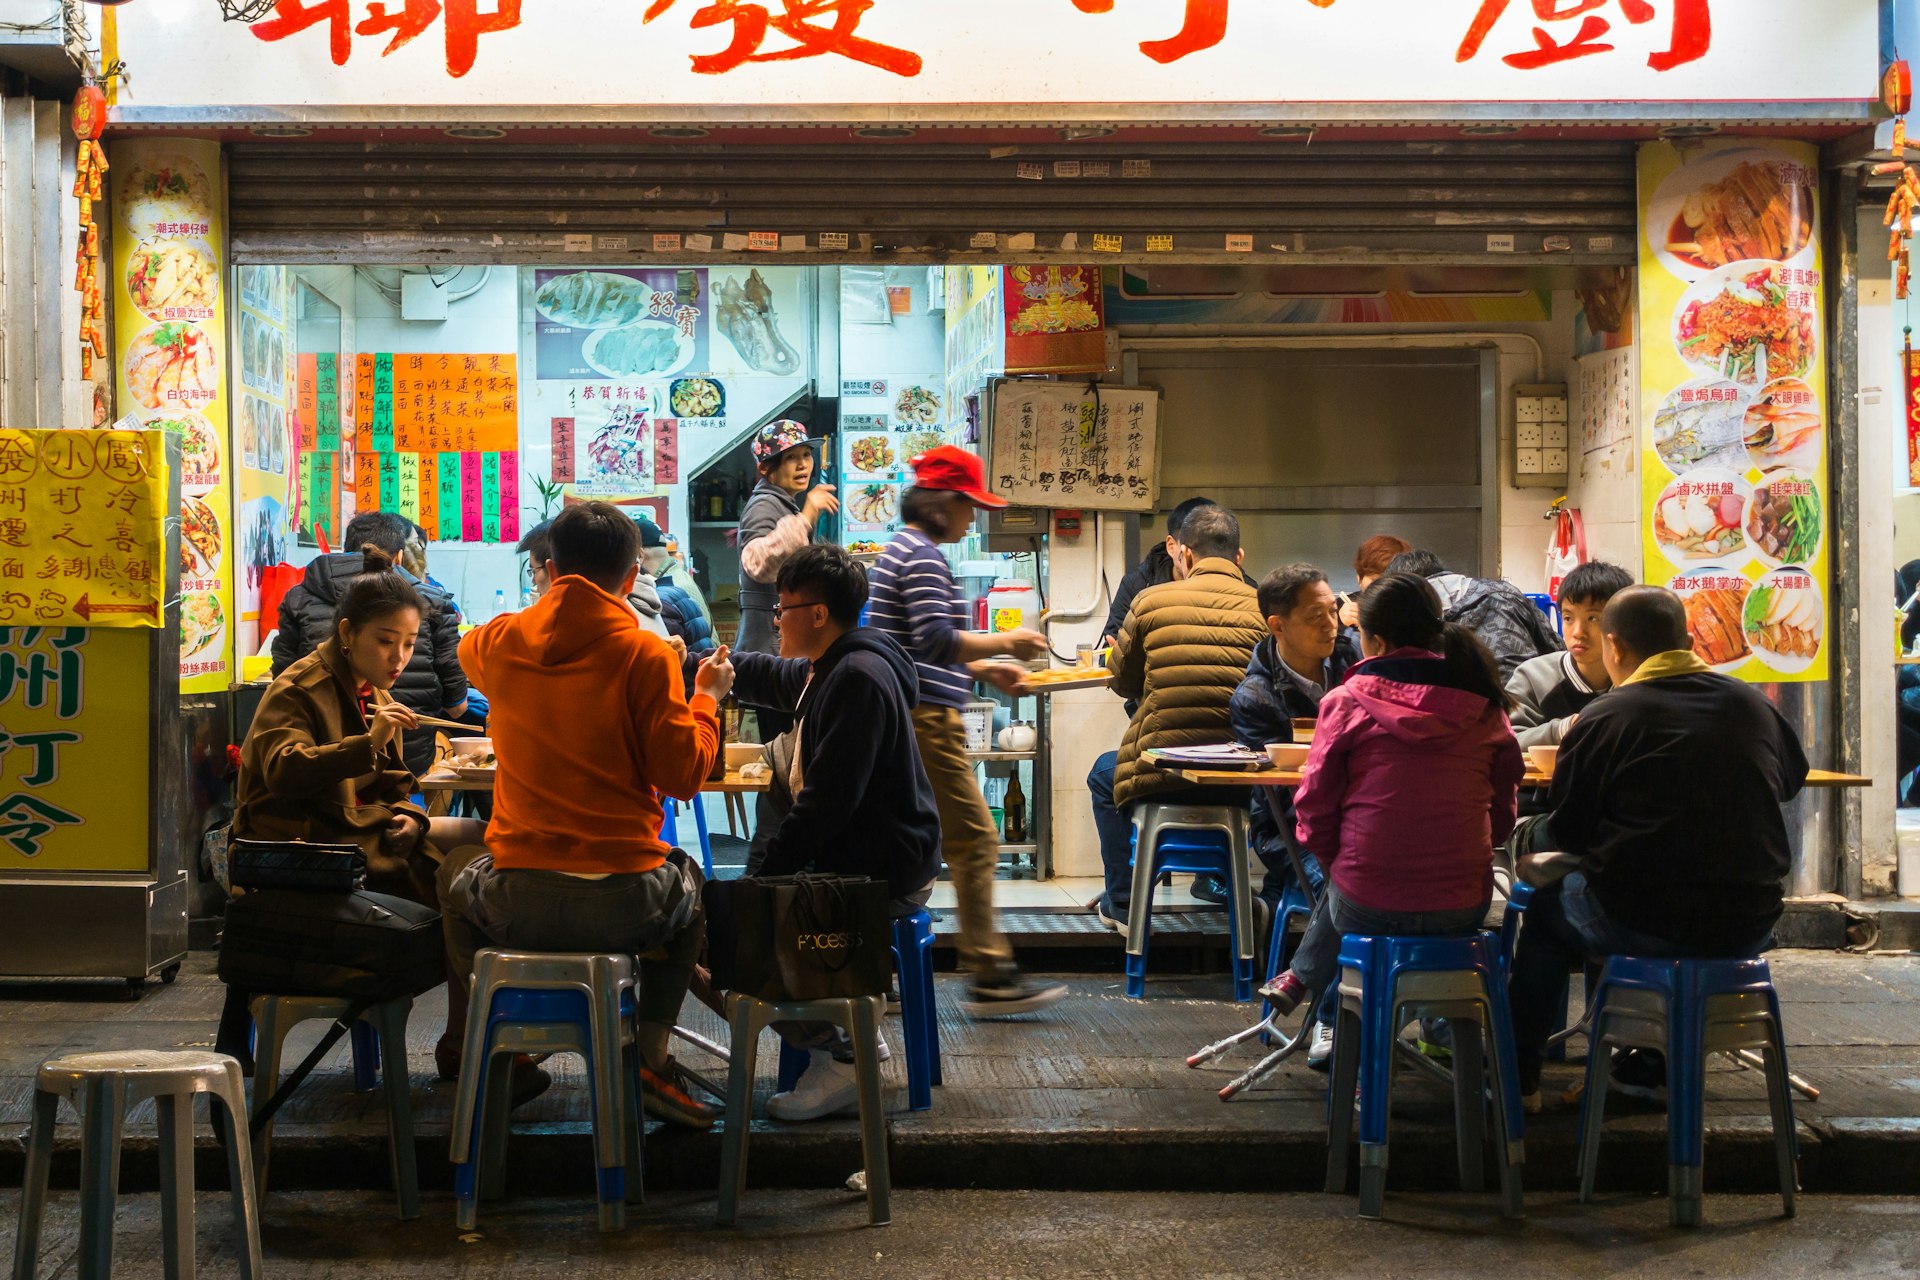 Street scene with local people dine at a street vendor in Mong Kok area. Hong Kong